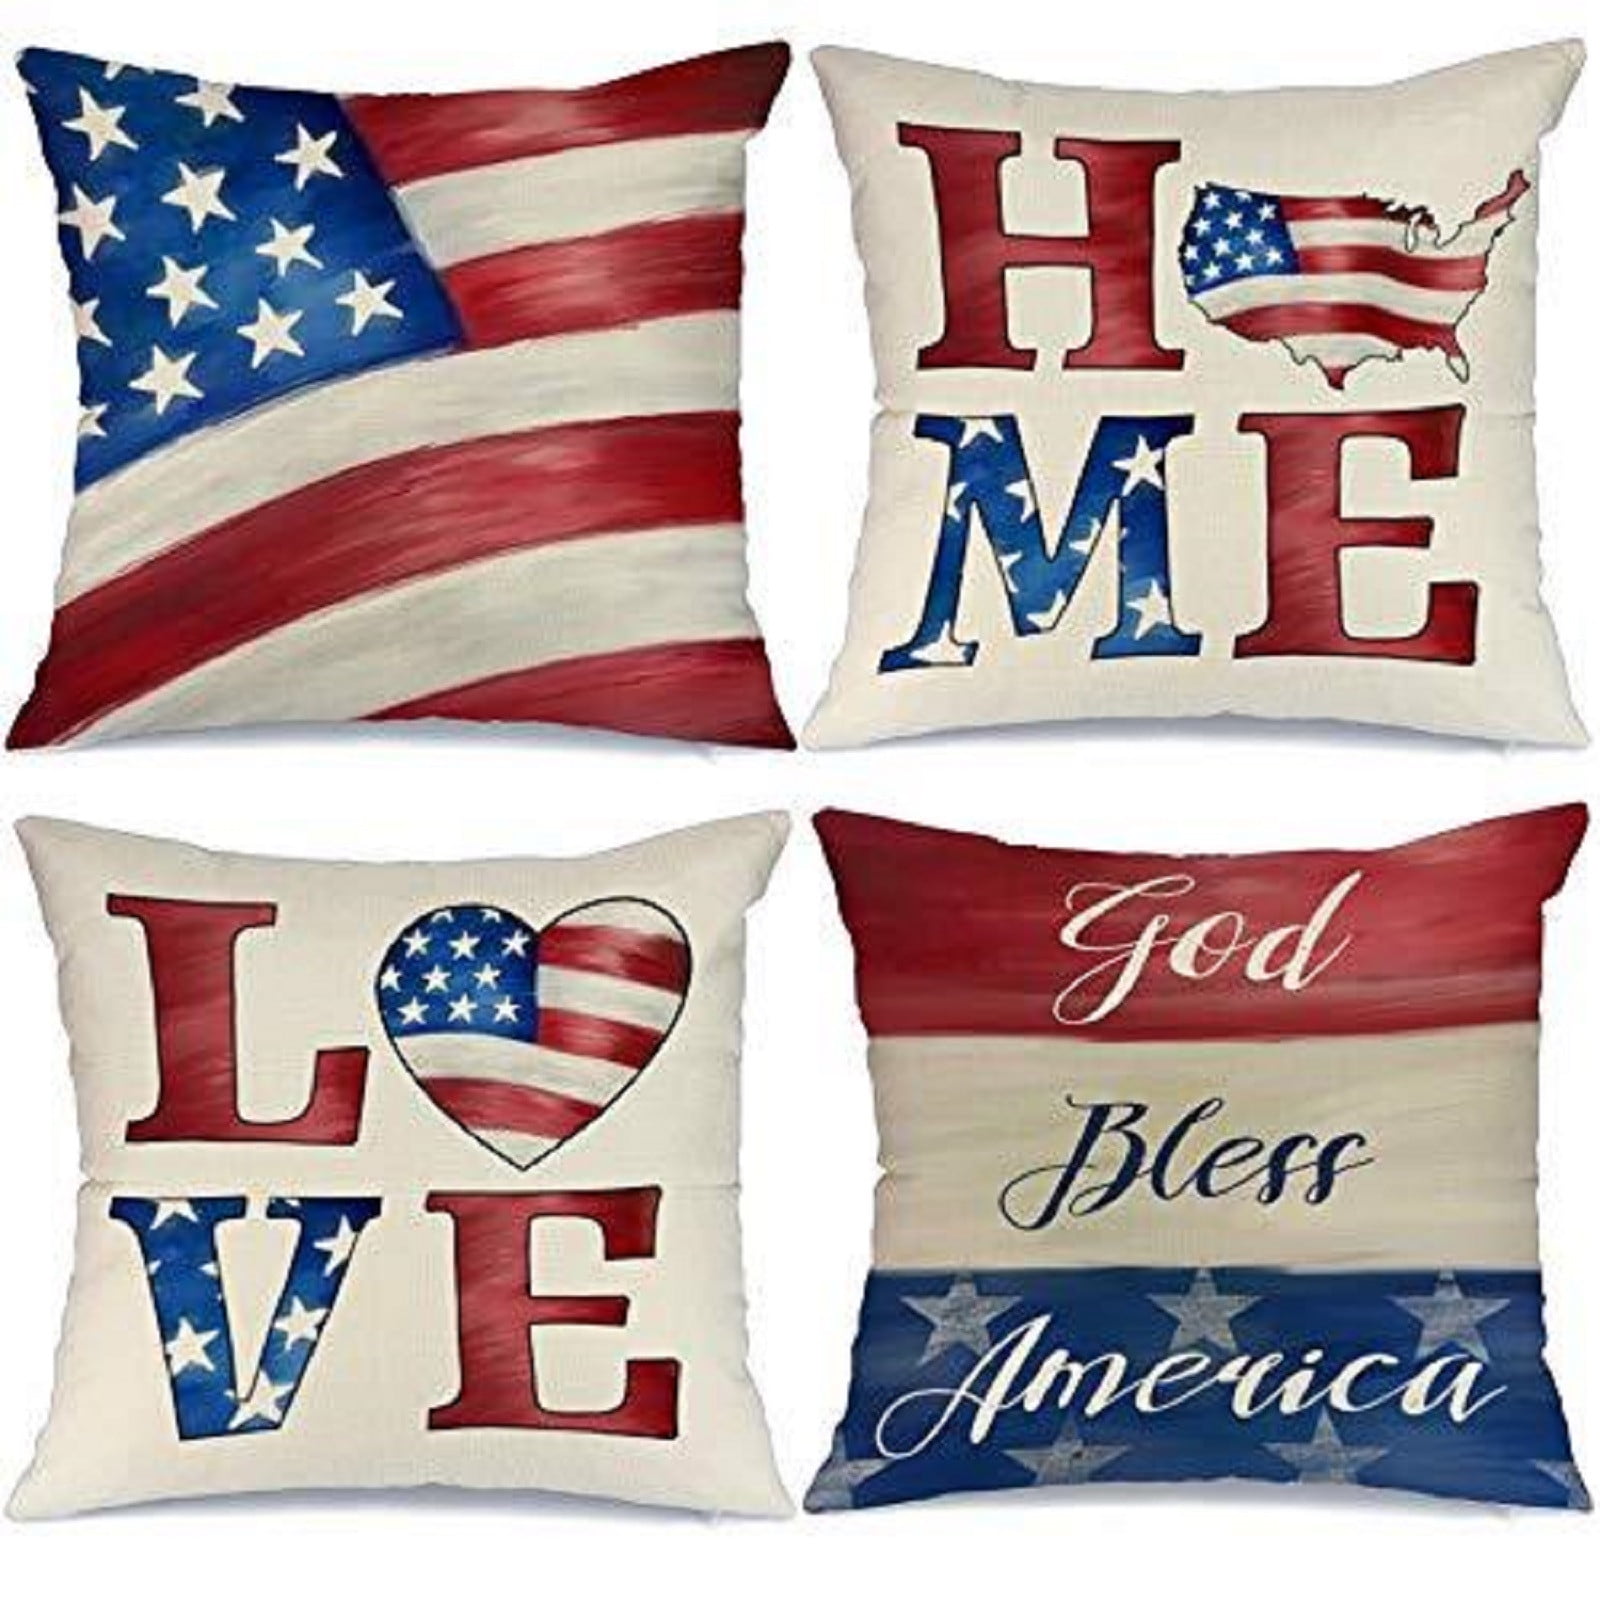 Baofu American Flag Pillow Cases Square Cotton Throw Pillow Covers Soft Breathable Independence Day Zipper Cushion Covers Decoration for Sofa Bed Livingroom 2PCS 20 x 20 inch